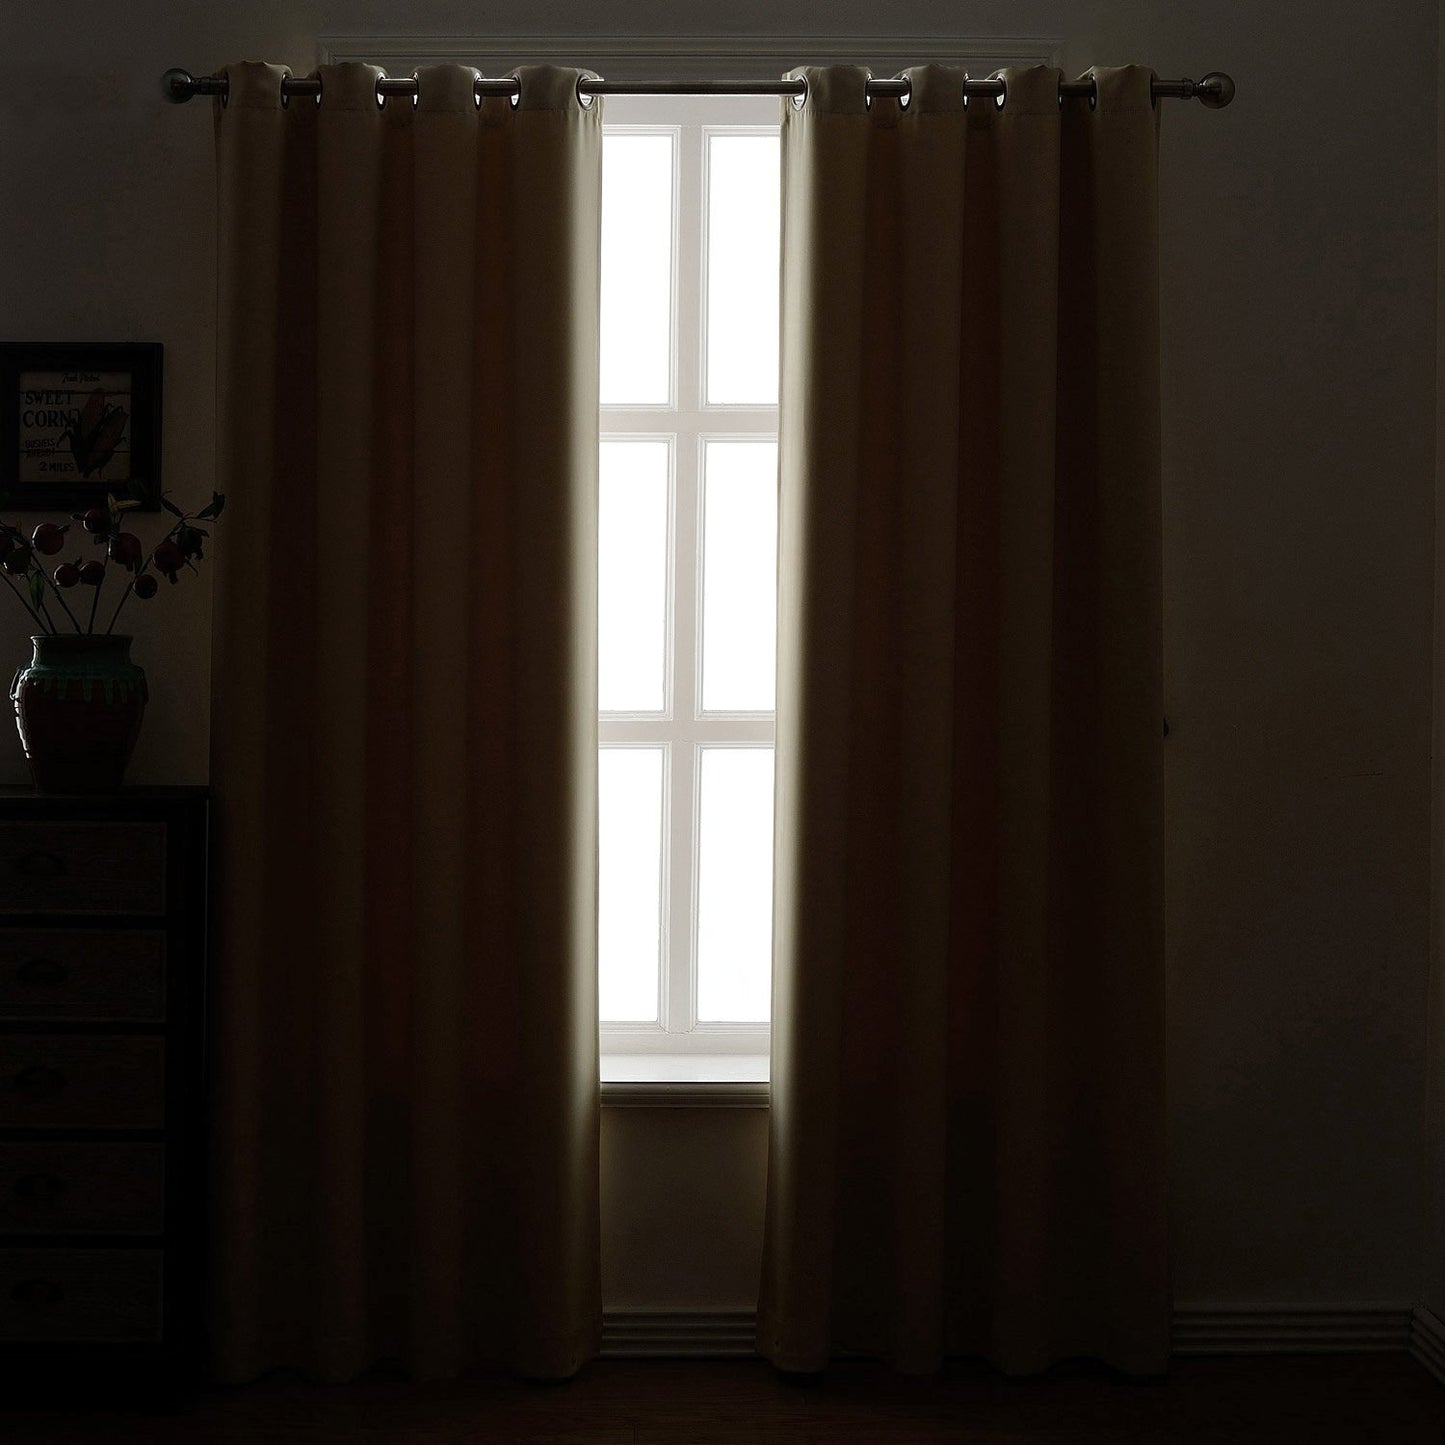 FAIRYLAND Pitch Black Solid Thermal Insulated Grommet Blackout Curtains/Drapes for Bedroom Window (2 Panels, 42 inches Wide by 63 inches Long, White)